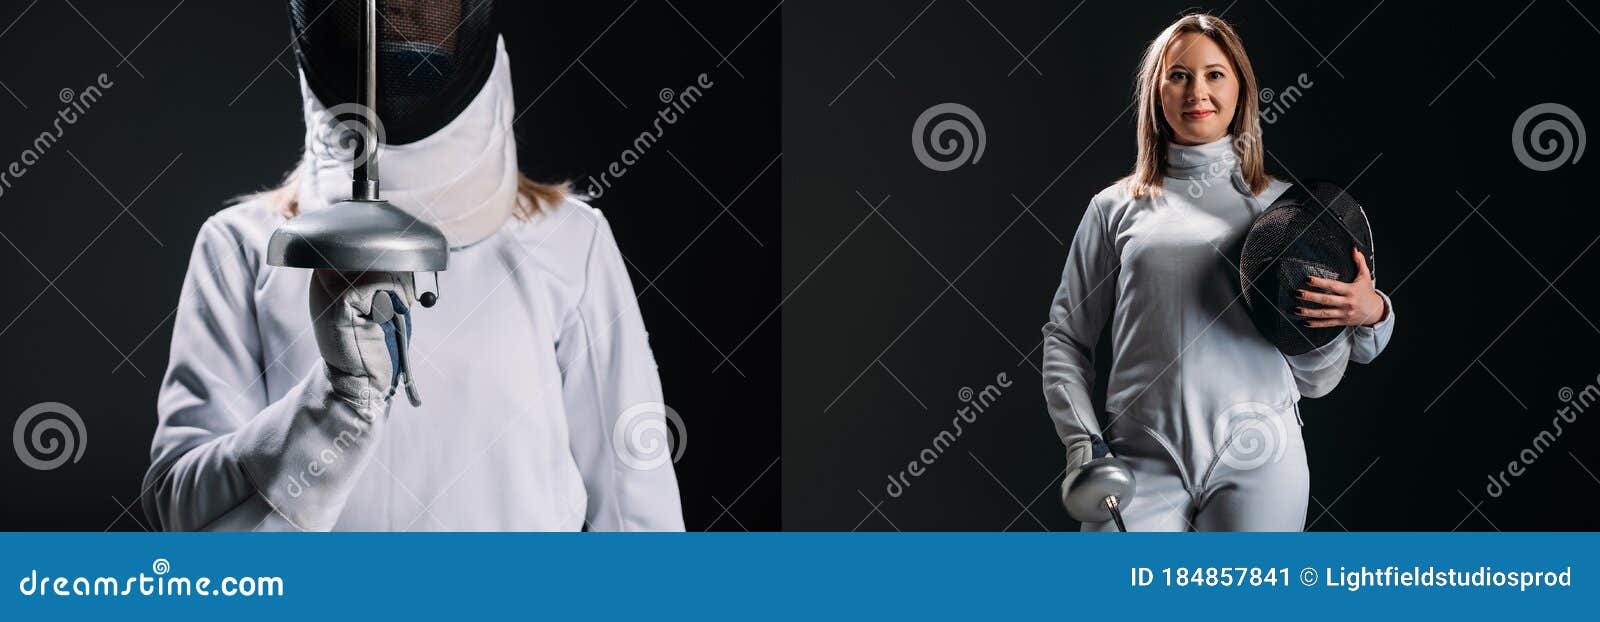 Of Fencer Holding Fencing Mask And Stock Image Image Of Swordswoman Protection